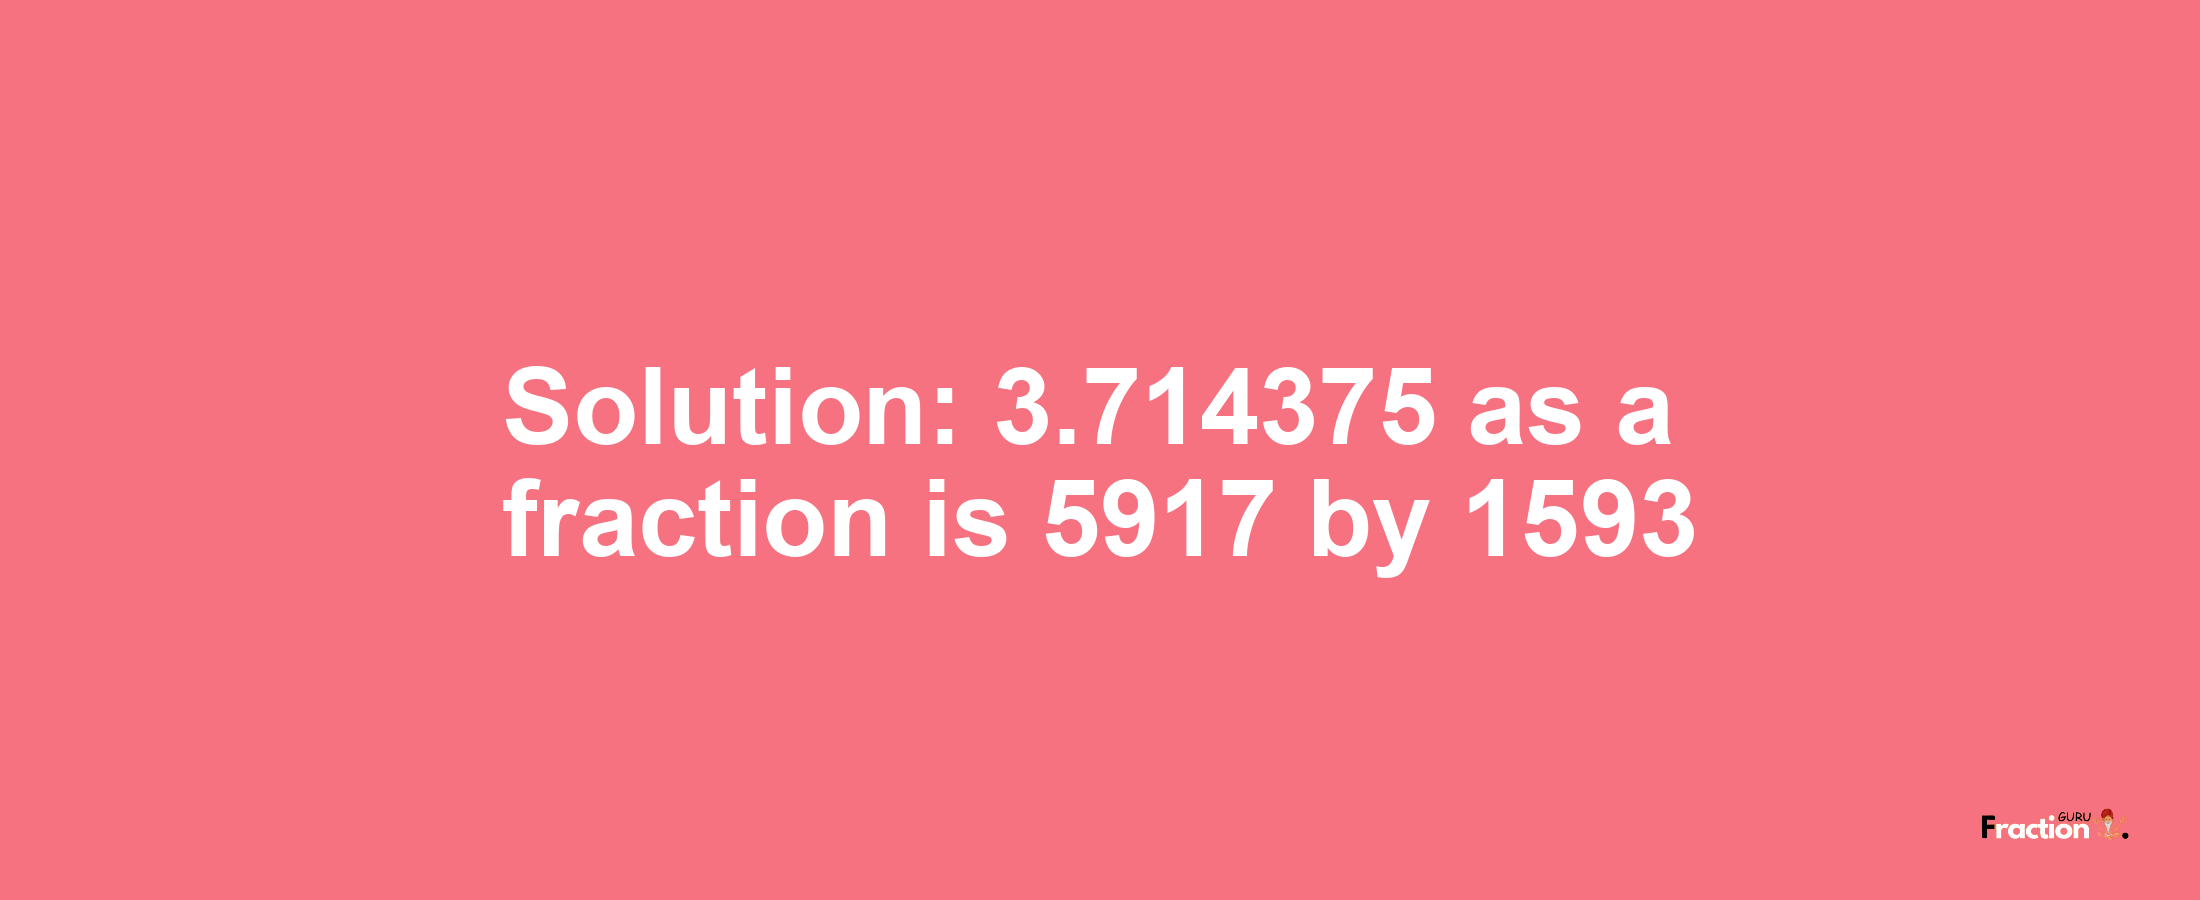 Solution:3.714375 as a fraction is 5917/1593